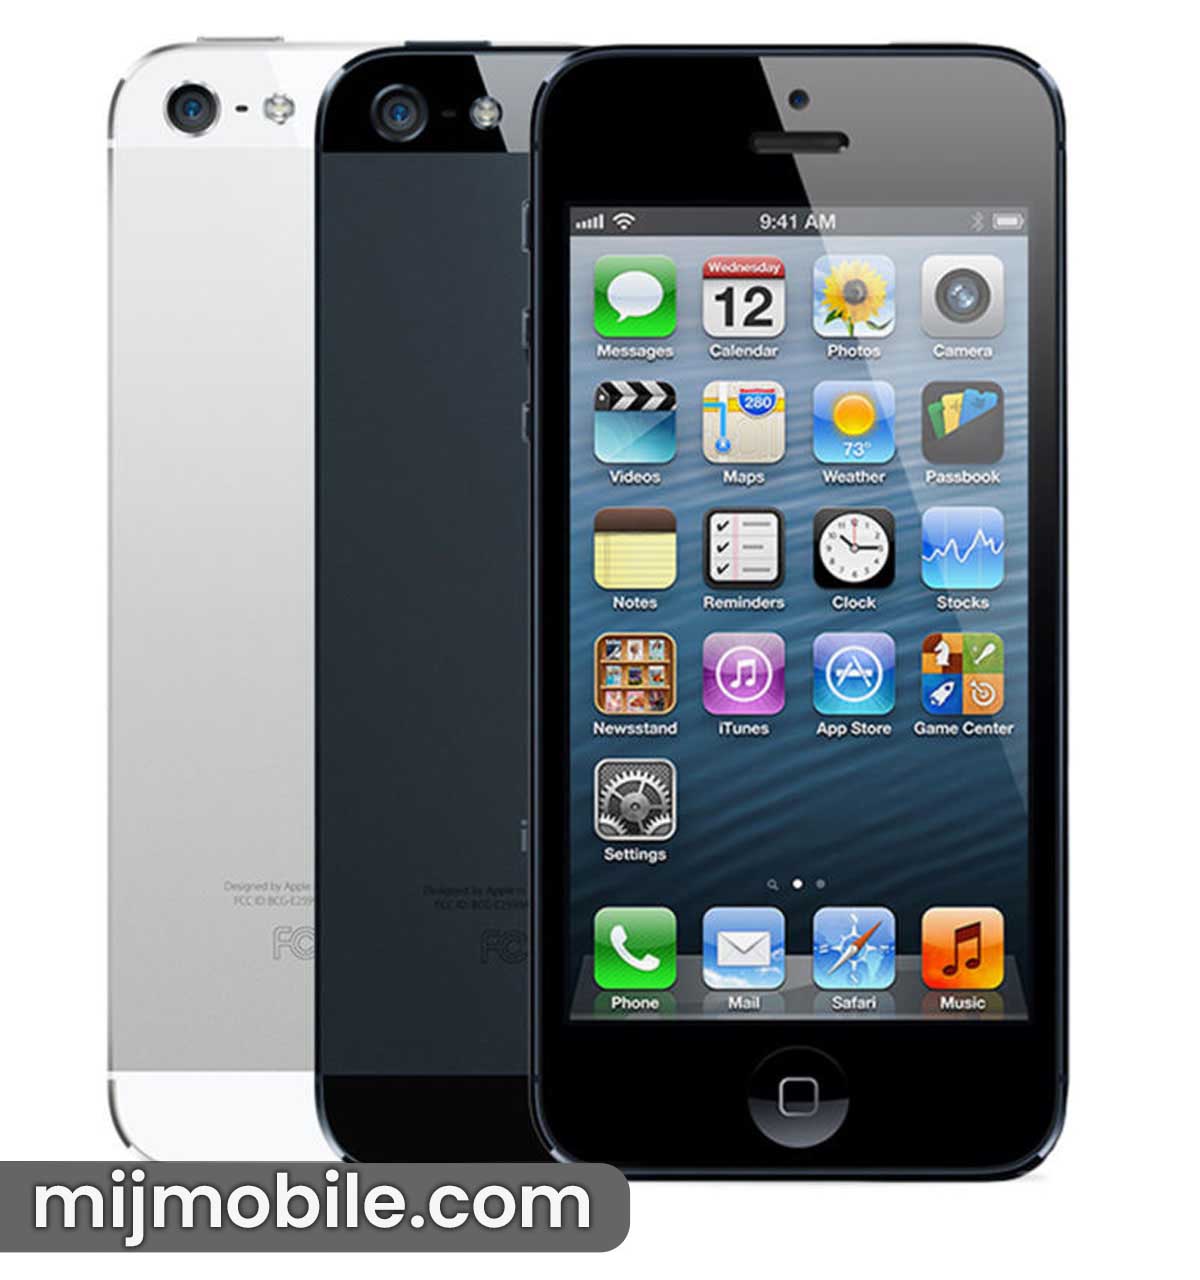 Apple iPhone 5 Price in Pakistan & Specifications The price of Apple iPhone 5 Price in Pakistanis only 25,799